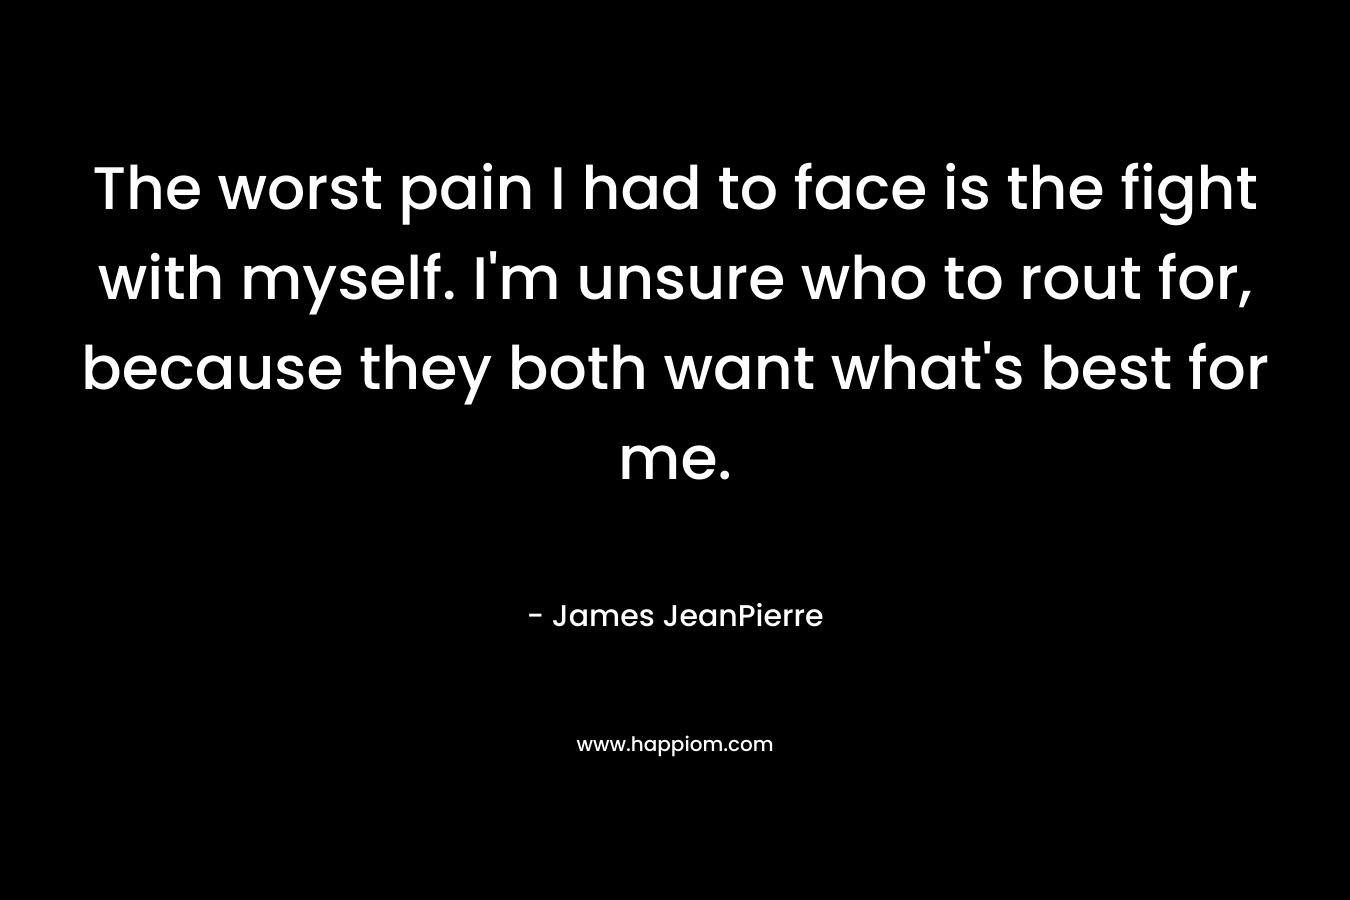 The worst pain I had to face is the fight with myself. I’m unsure who to rout for, because they both want what’s best for me. – James JeanPierre